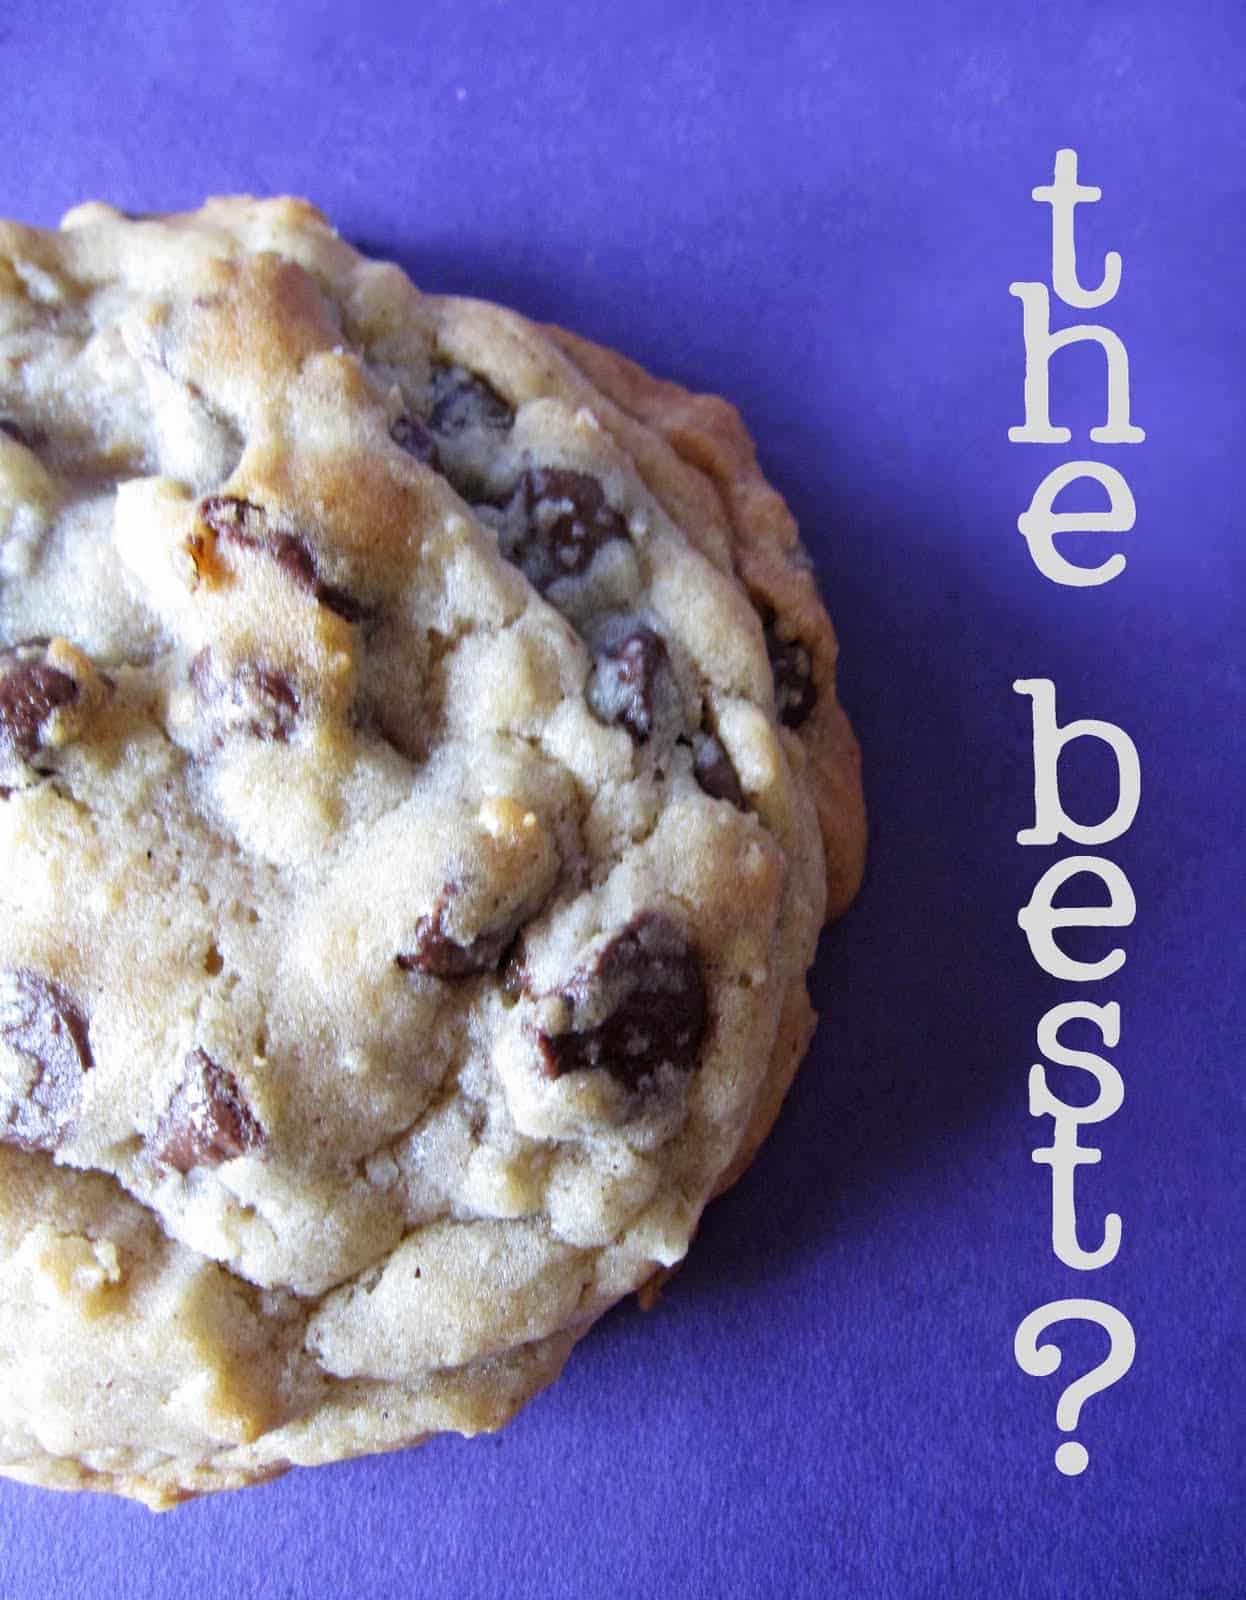 Overhead view of "the best?" chocolate chip cookie